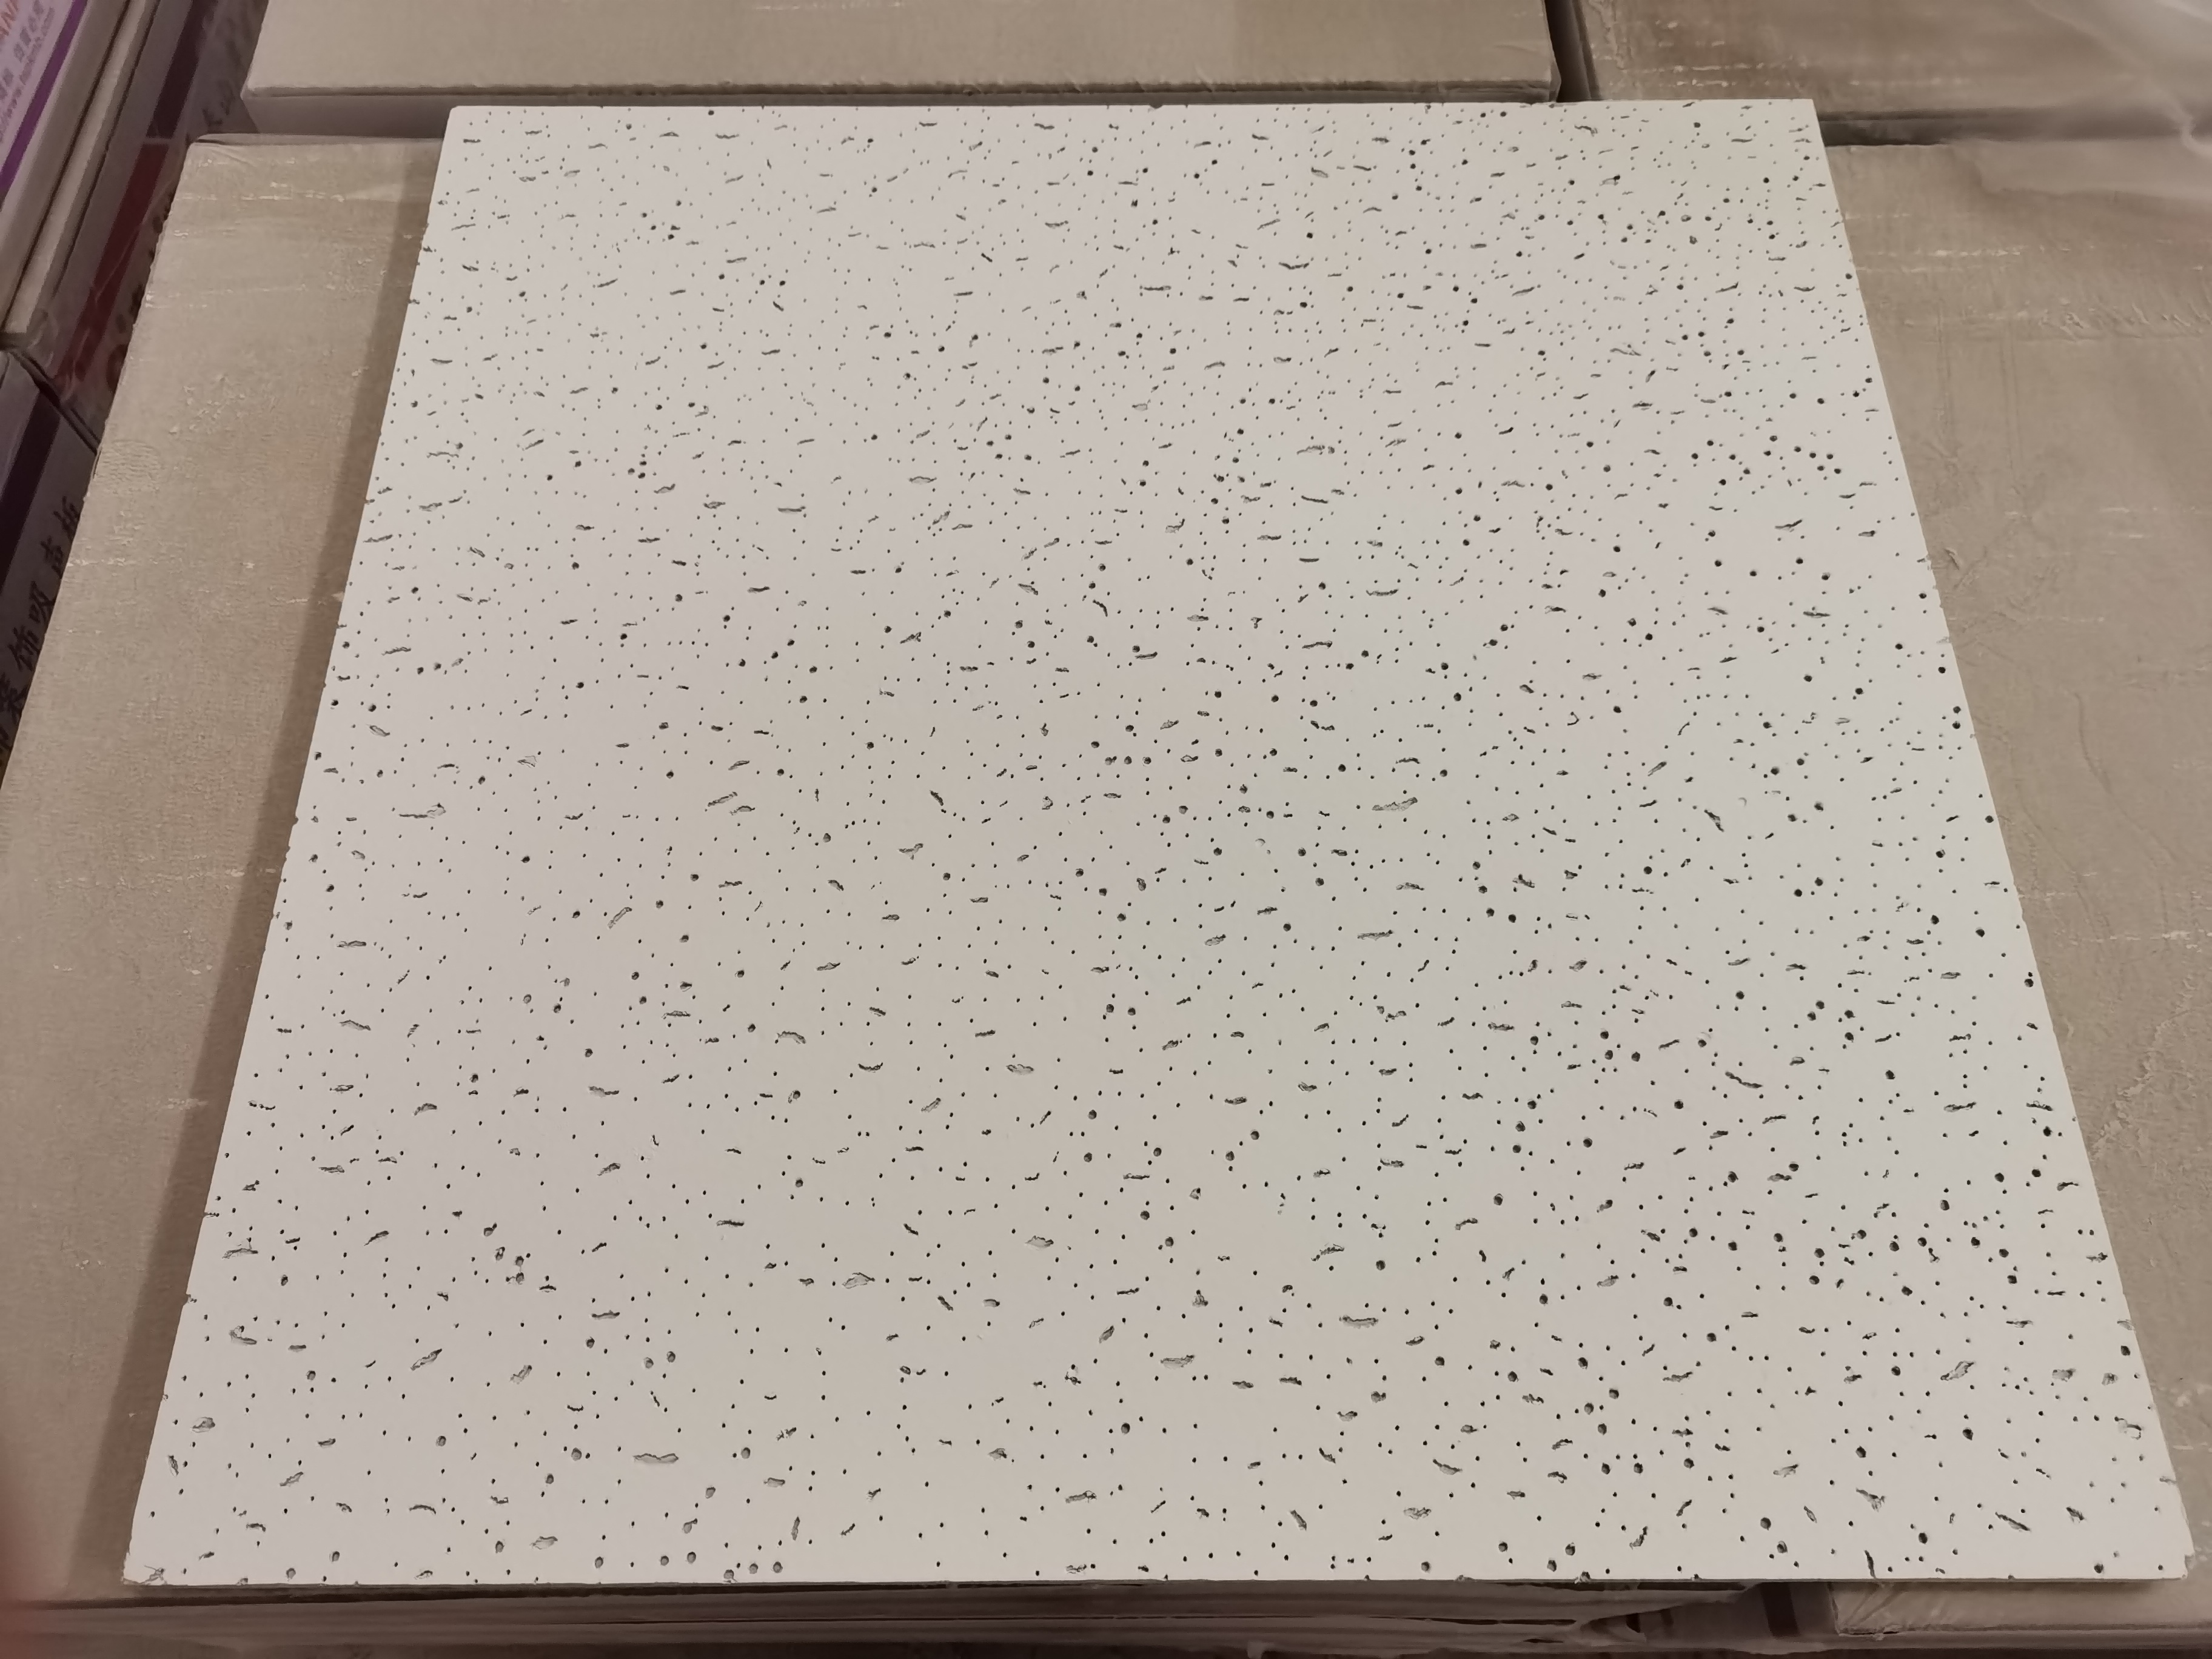 Pinong Fissured Mineral Fiber Ceiling Tile